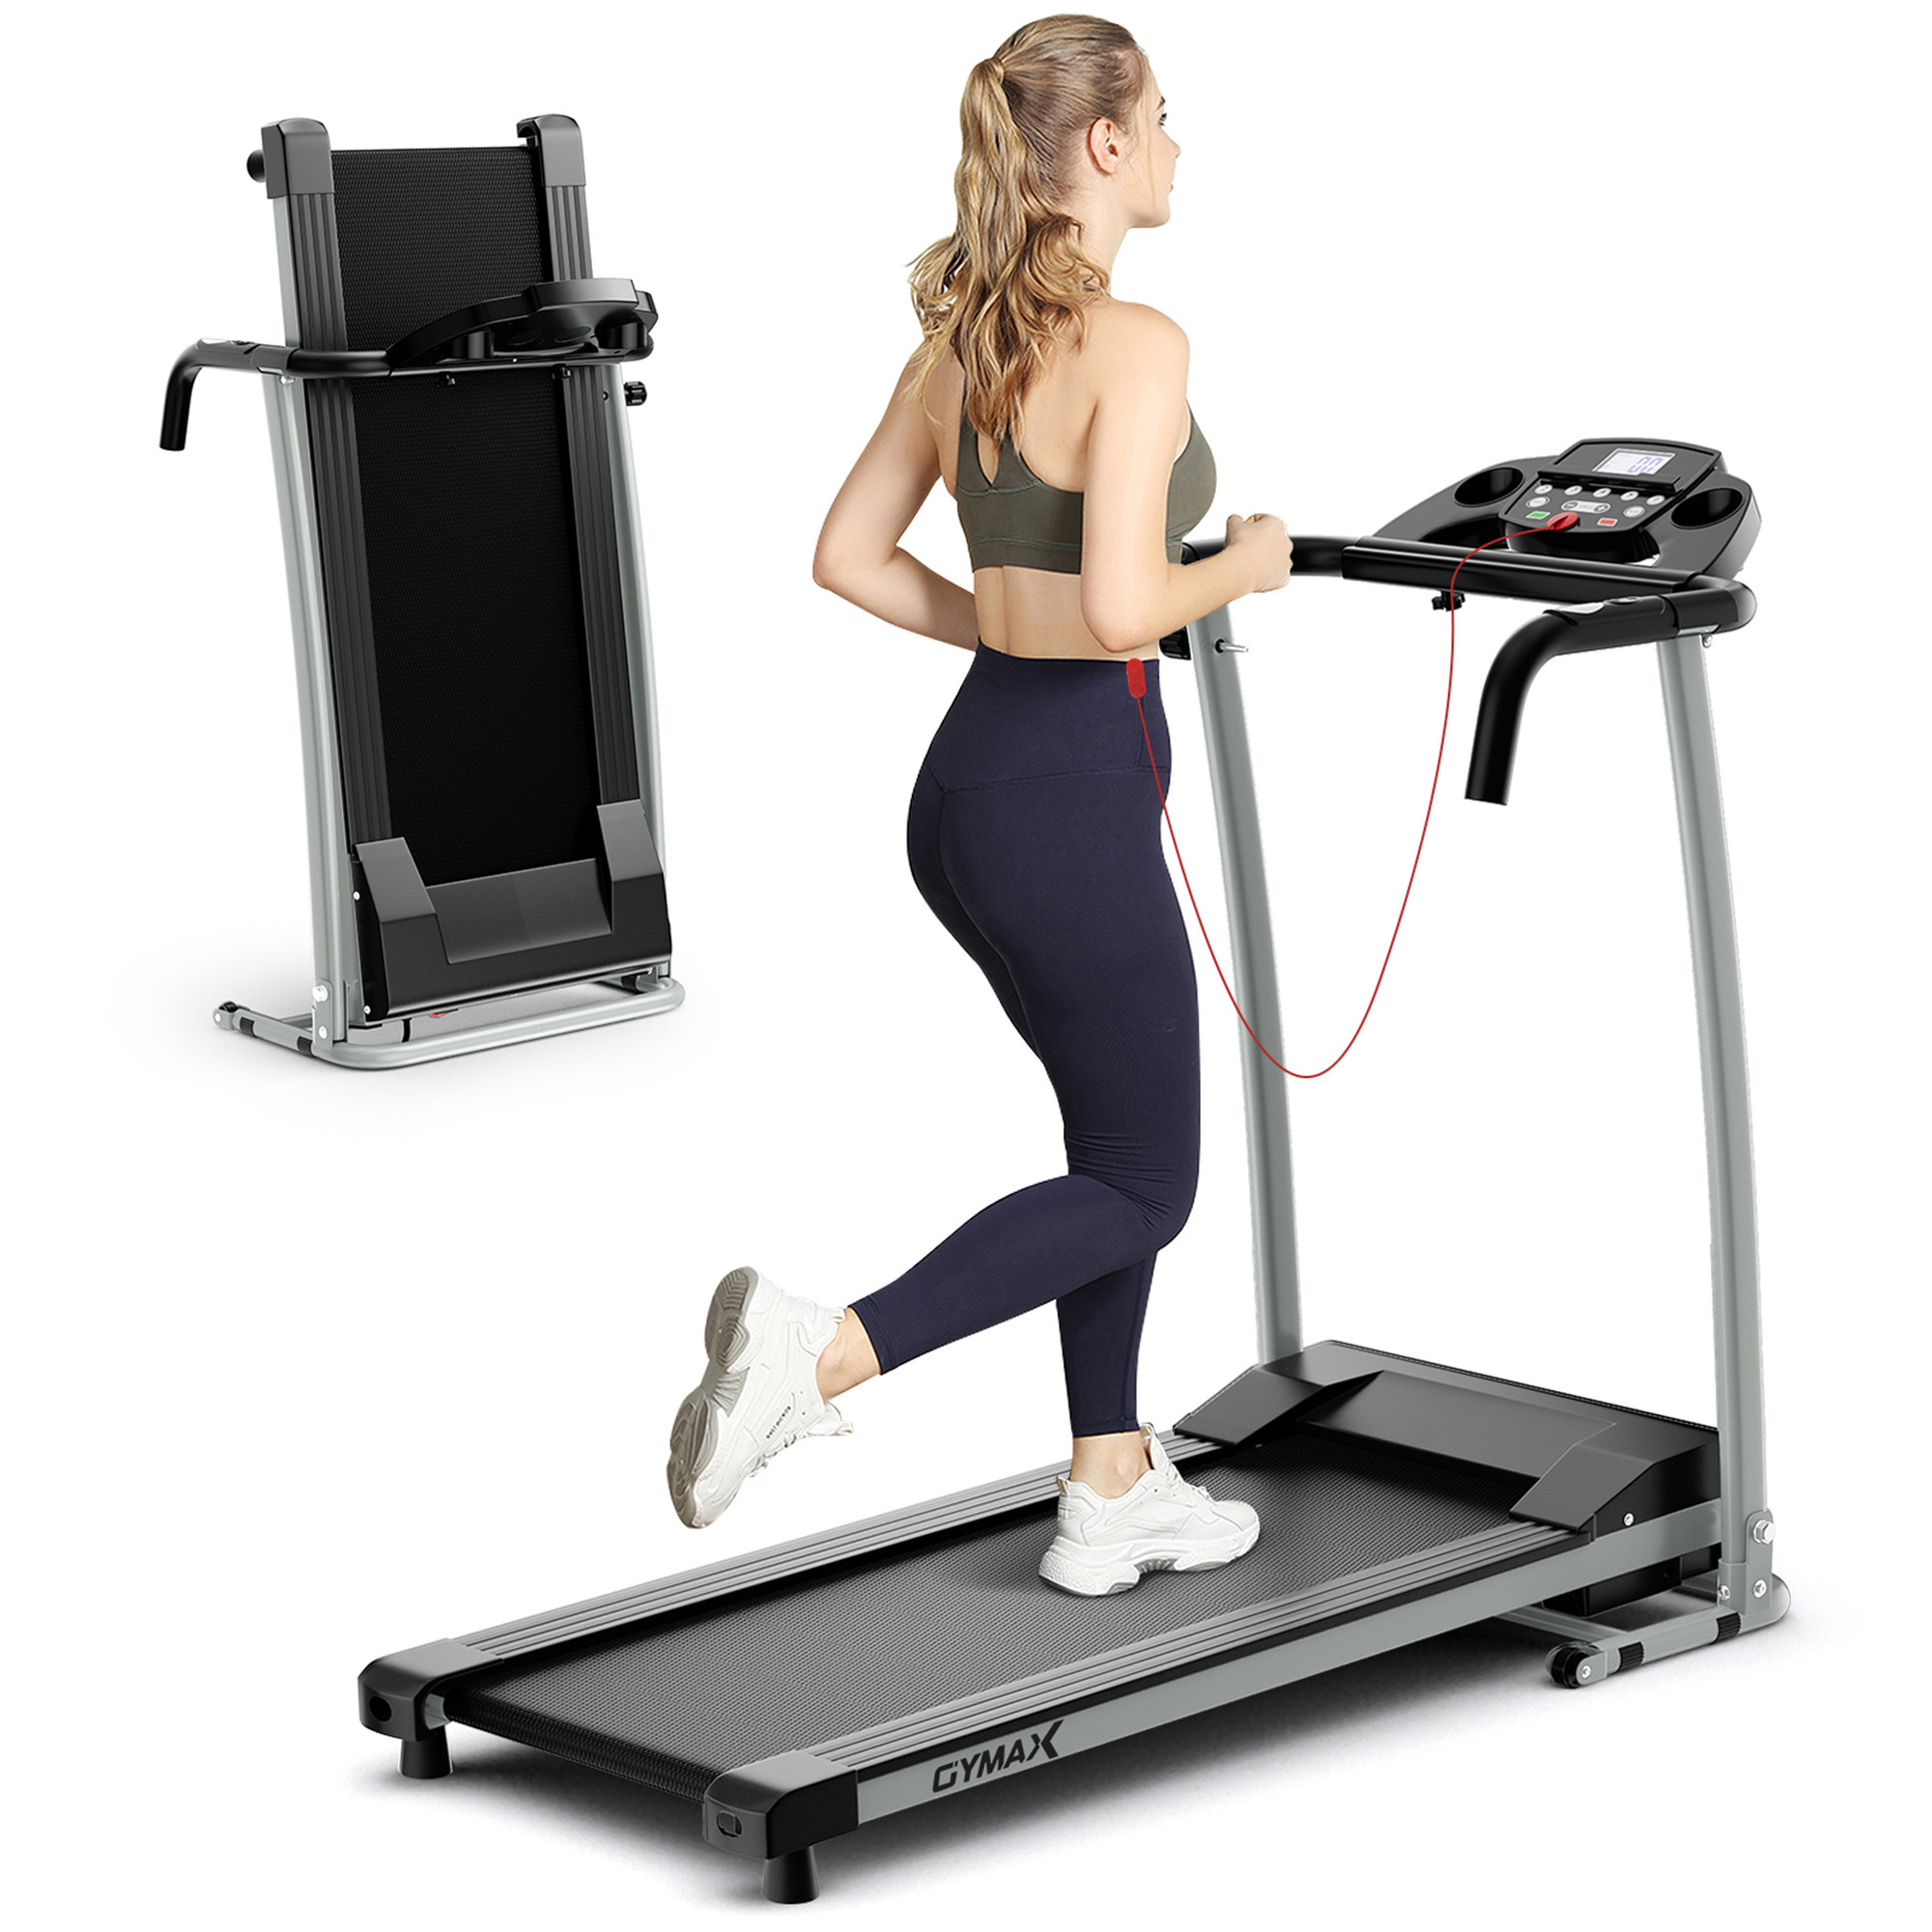 Gymax Folding Treadmill for Home Walking Running Machine w/ 12 Preset Programs - image 1 of 10